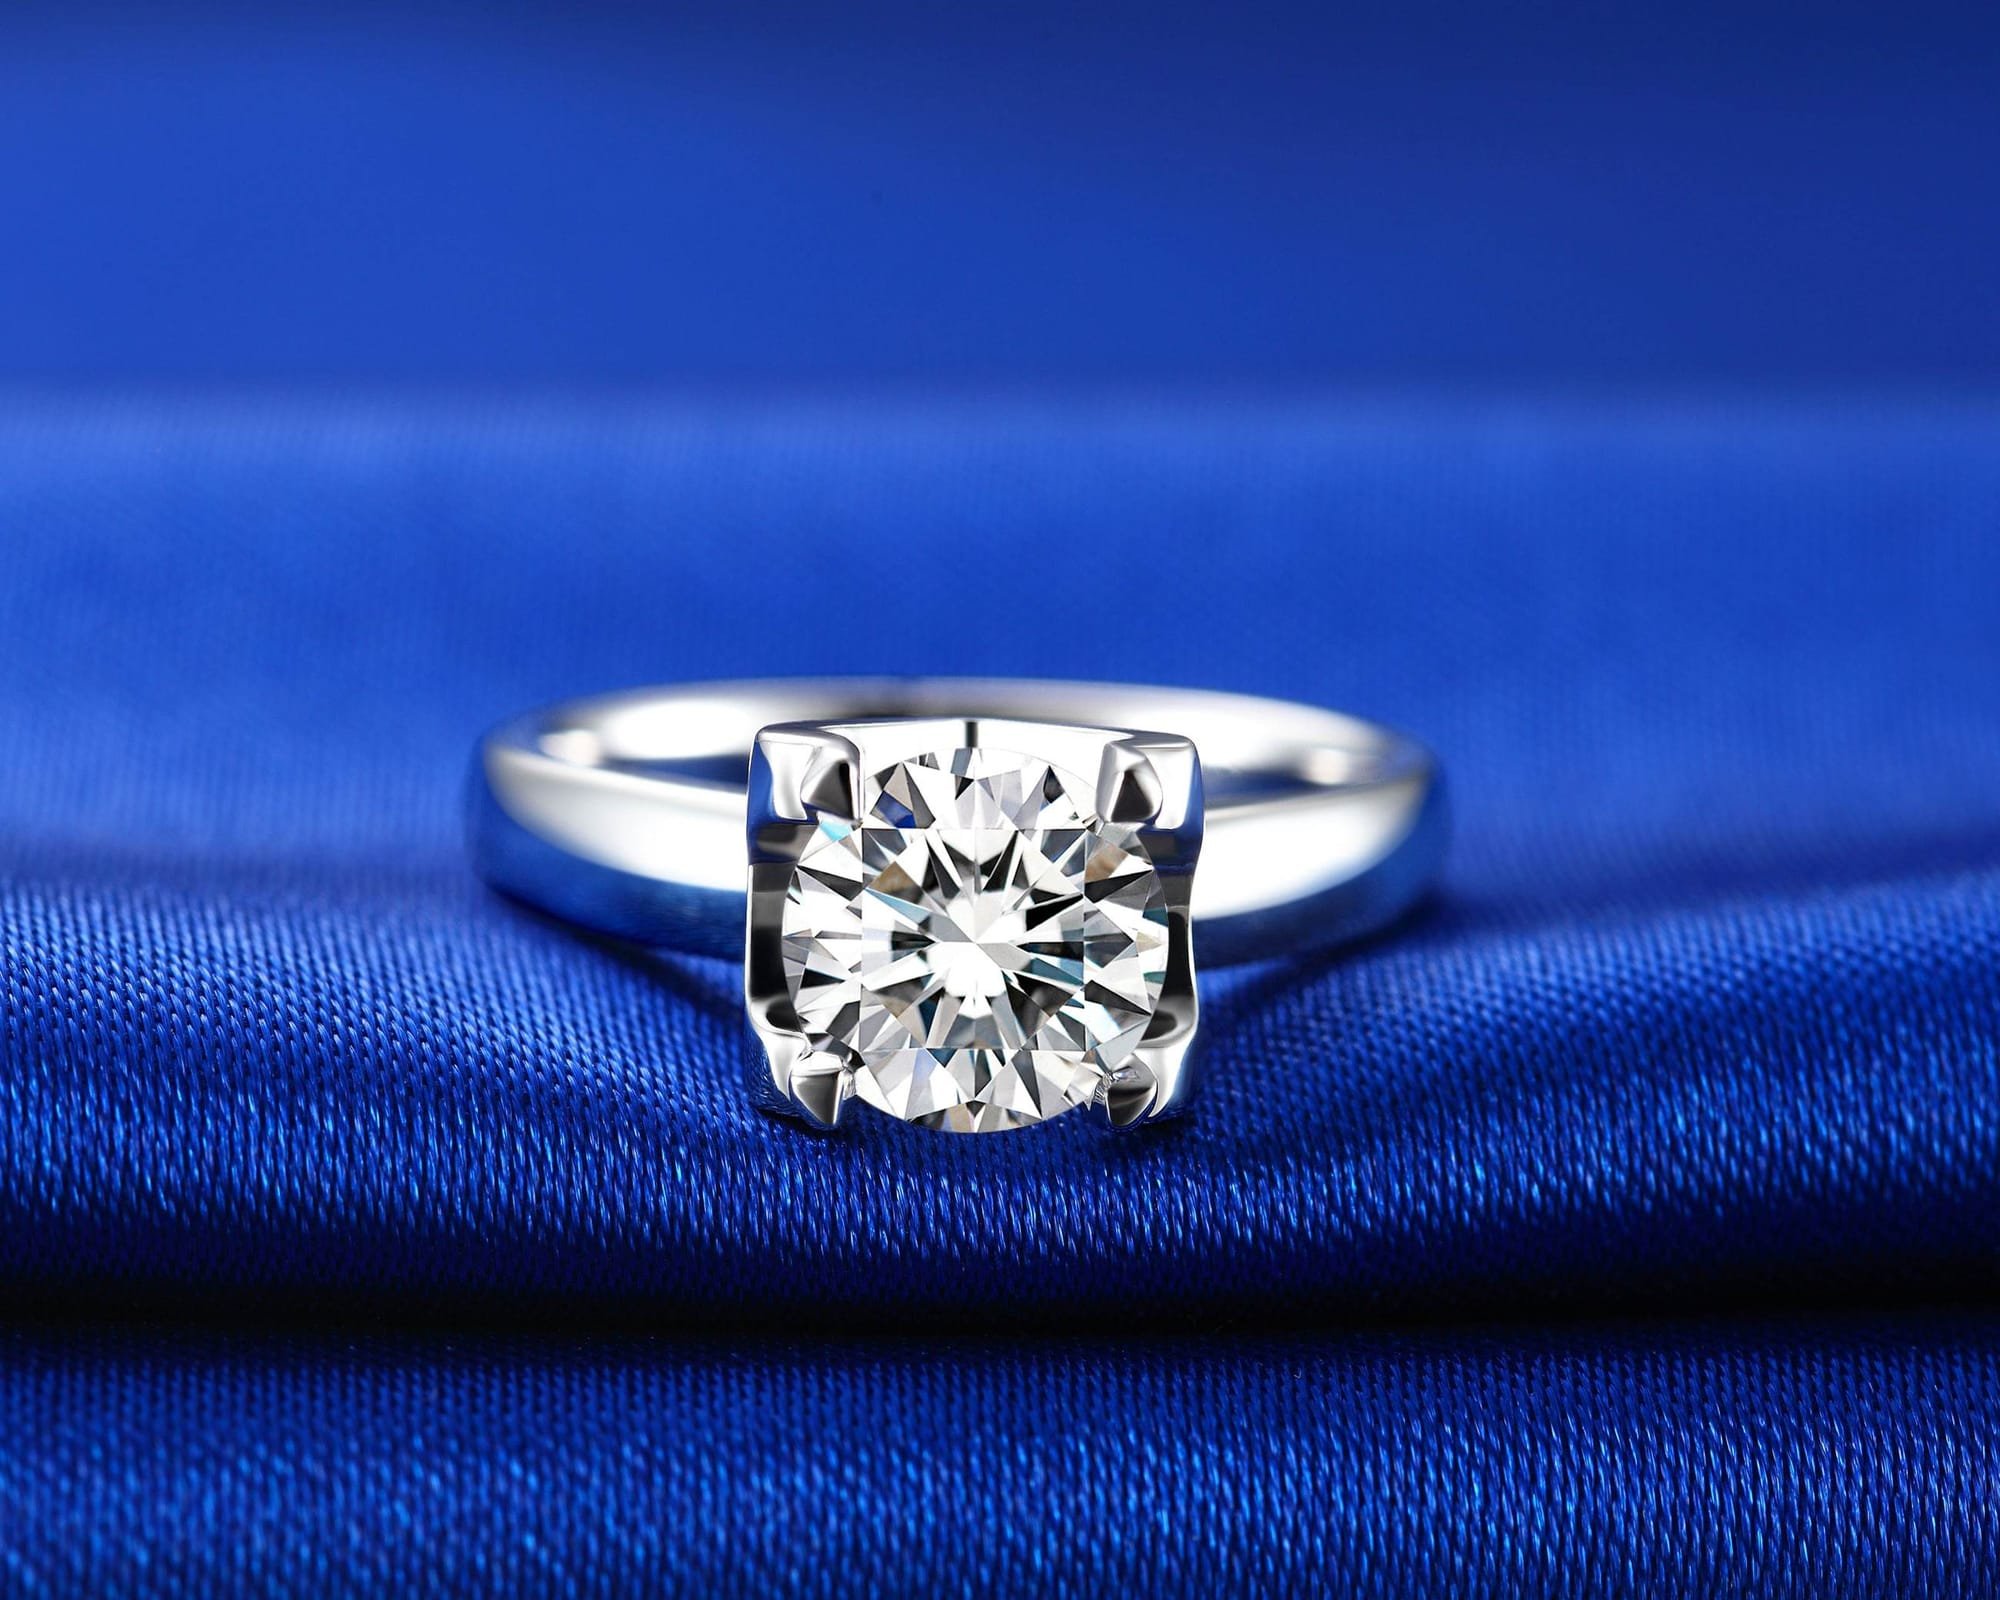 How much do you know about diamond cutting?